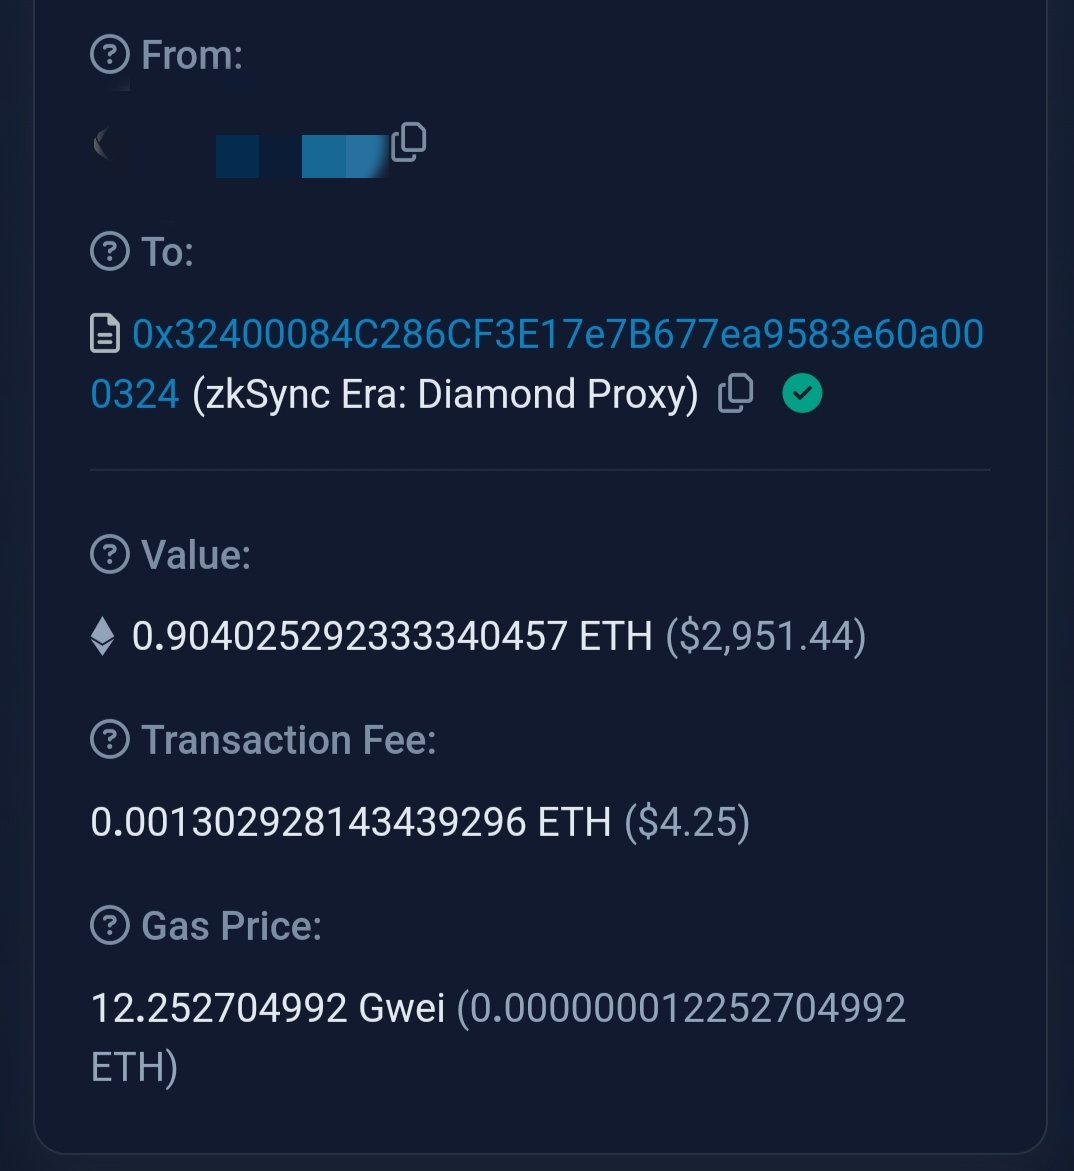 Ethereum gas at 12 gwei, bridge to zkSync now for wife-changing money.